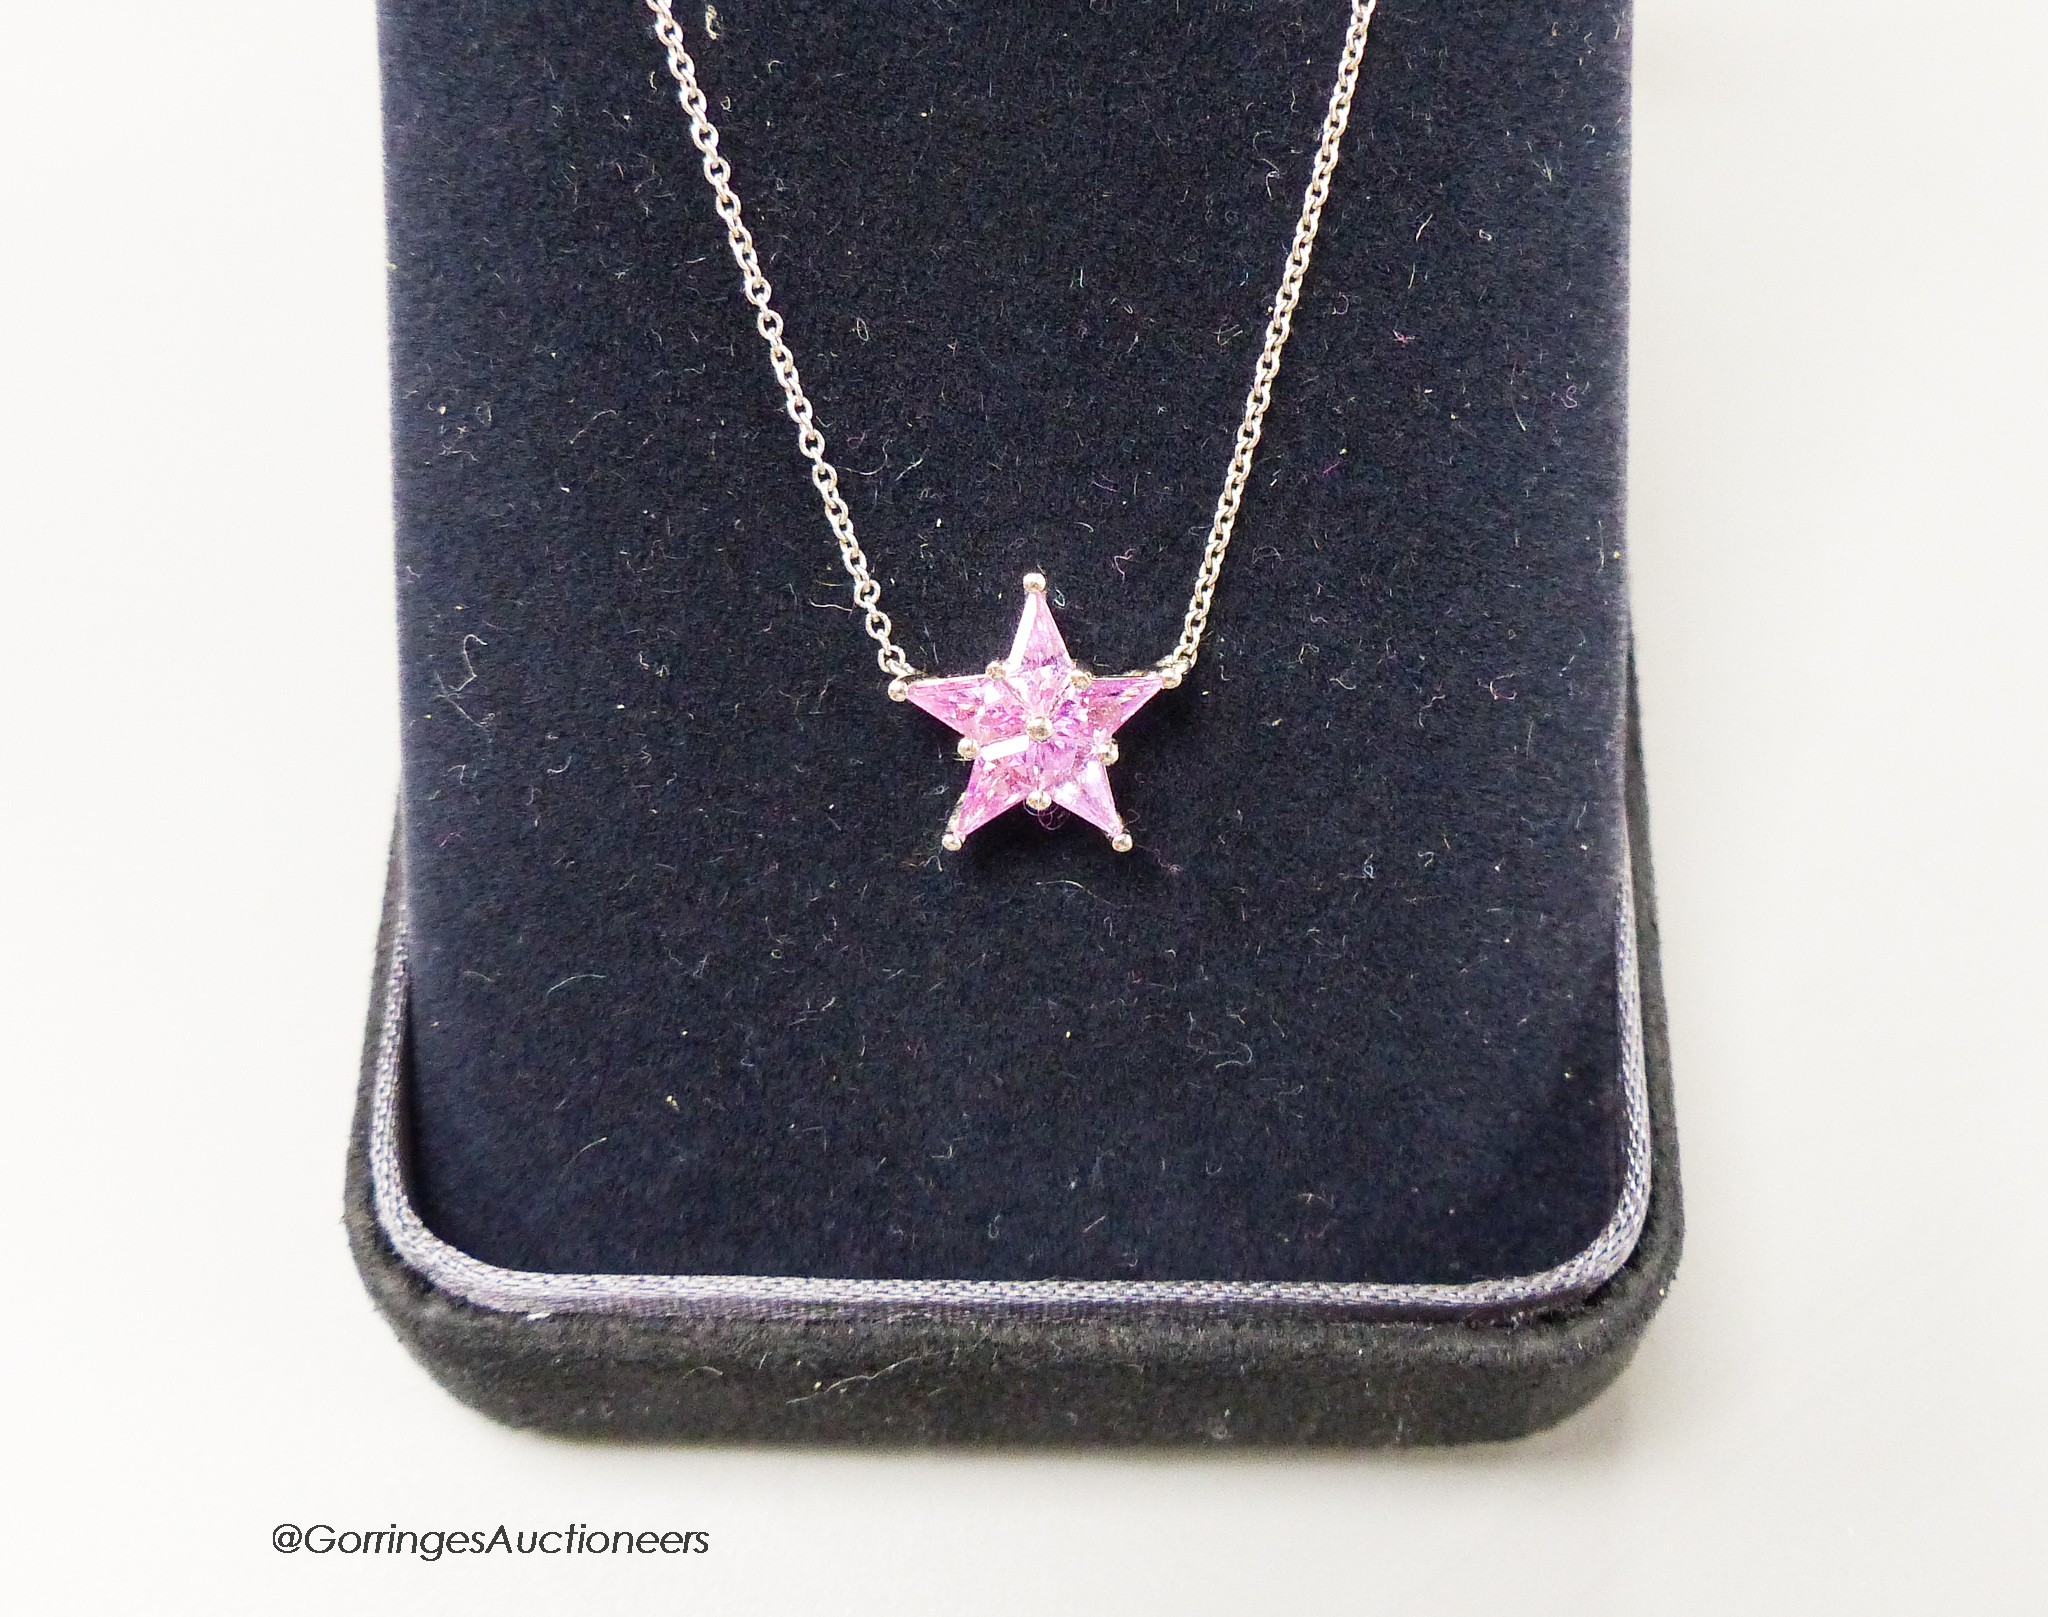 A modern Tiffany & Co platinum and five stone pink sapphire set star pendant necklace, star 11mm, gross weight 3.2 grams, in Tiffany & Co box, with original New York purchase receipt.